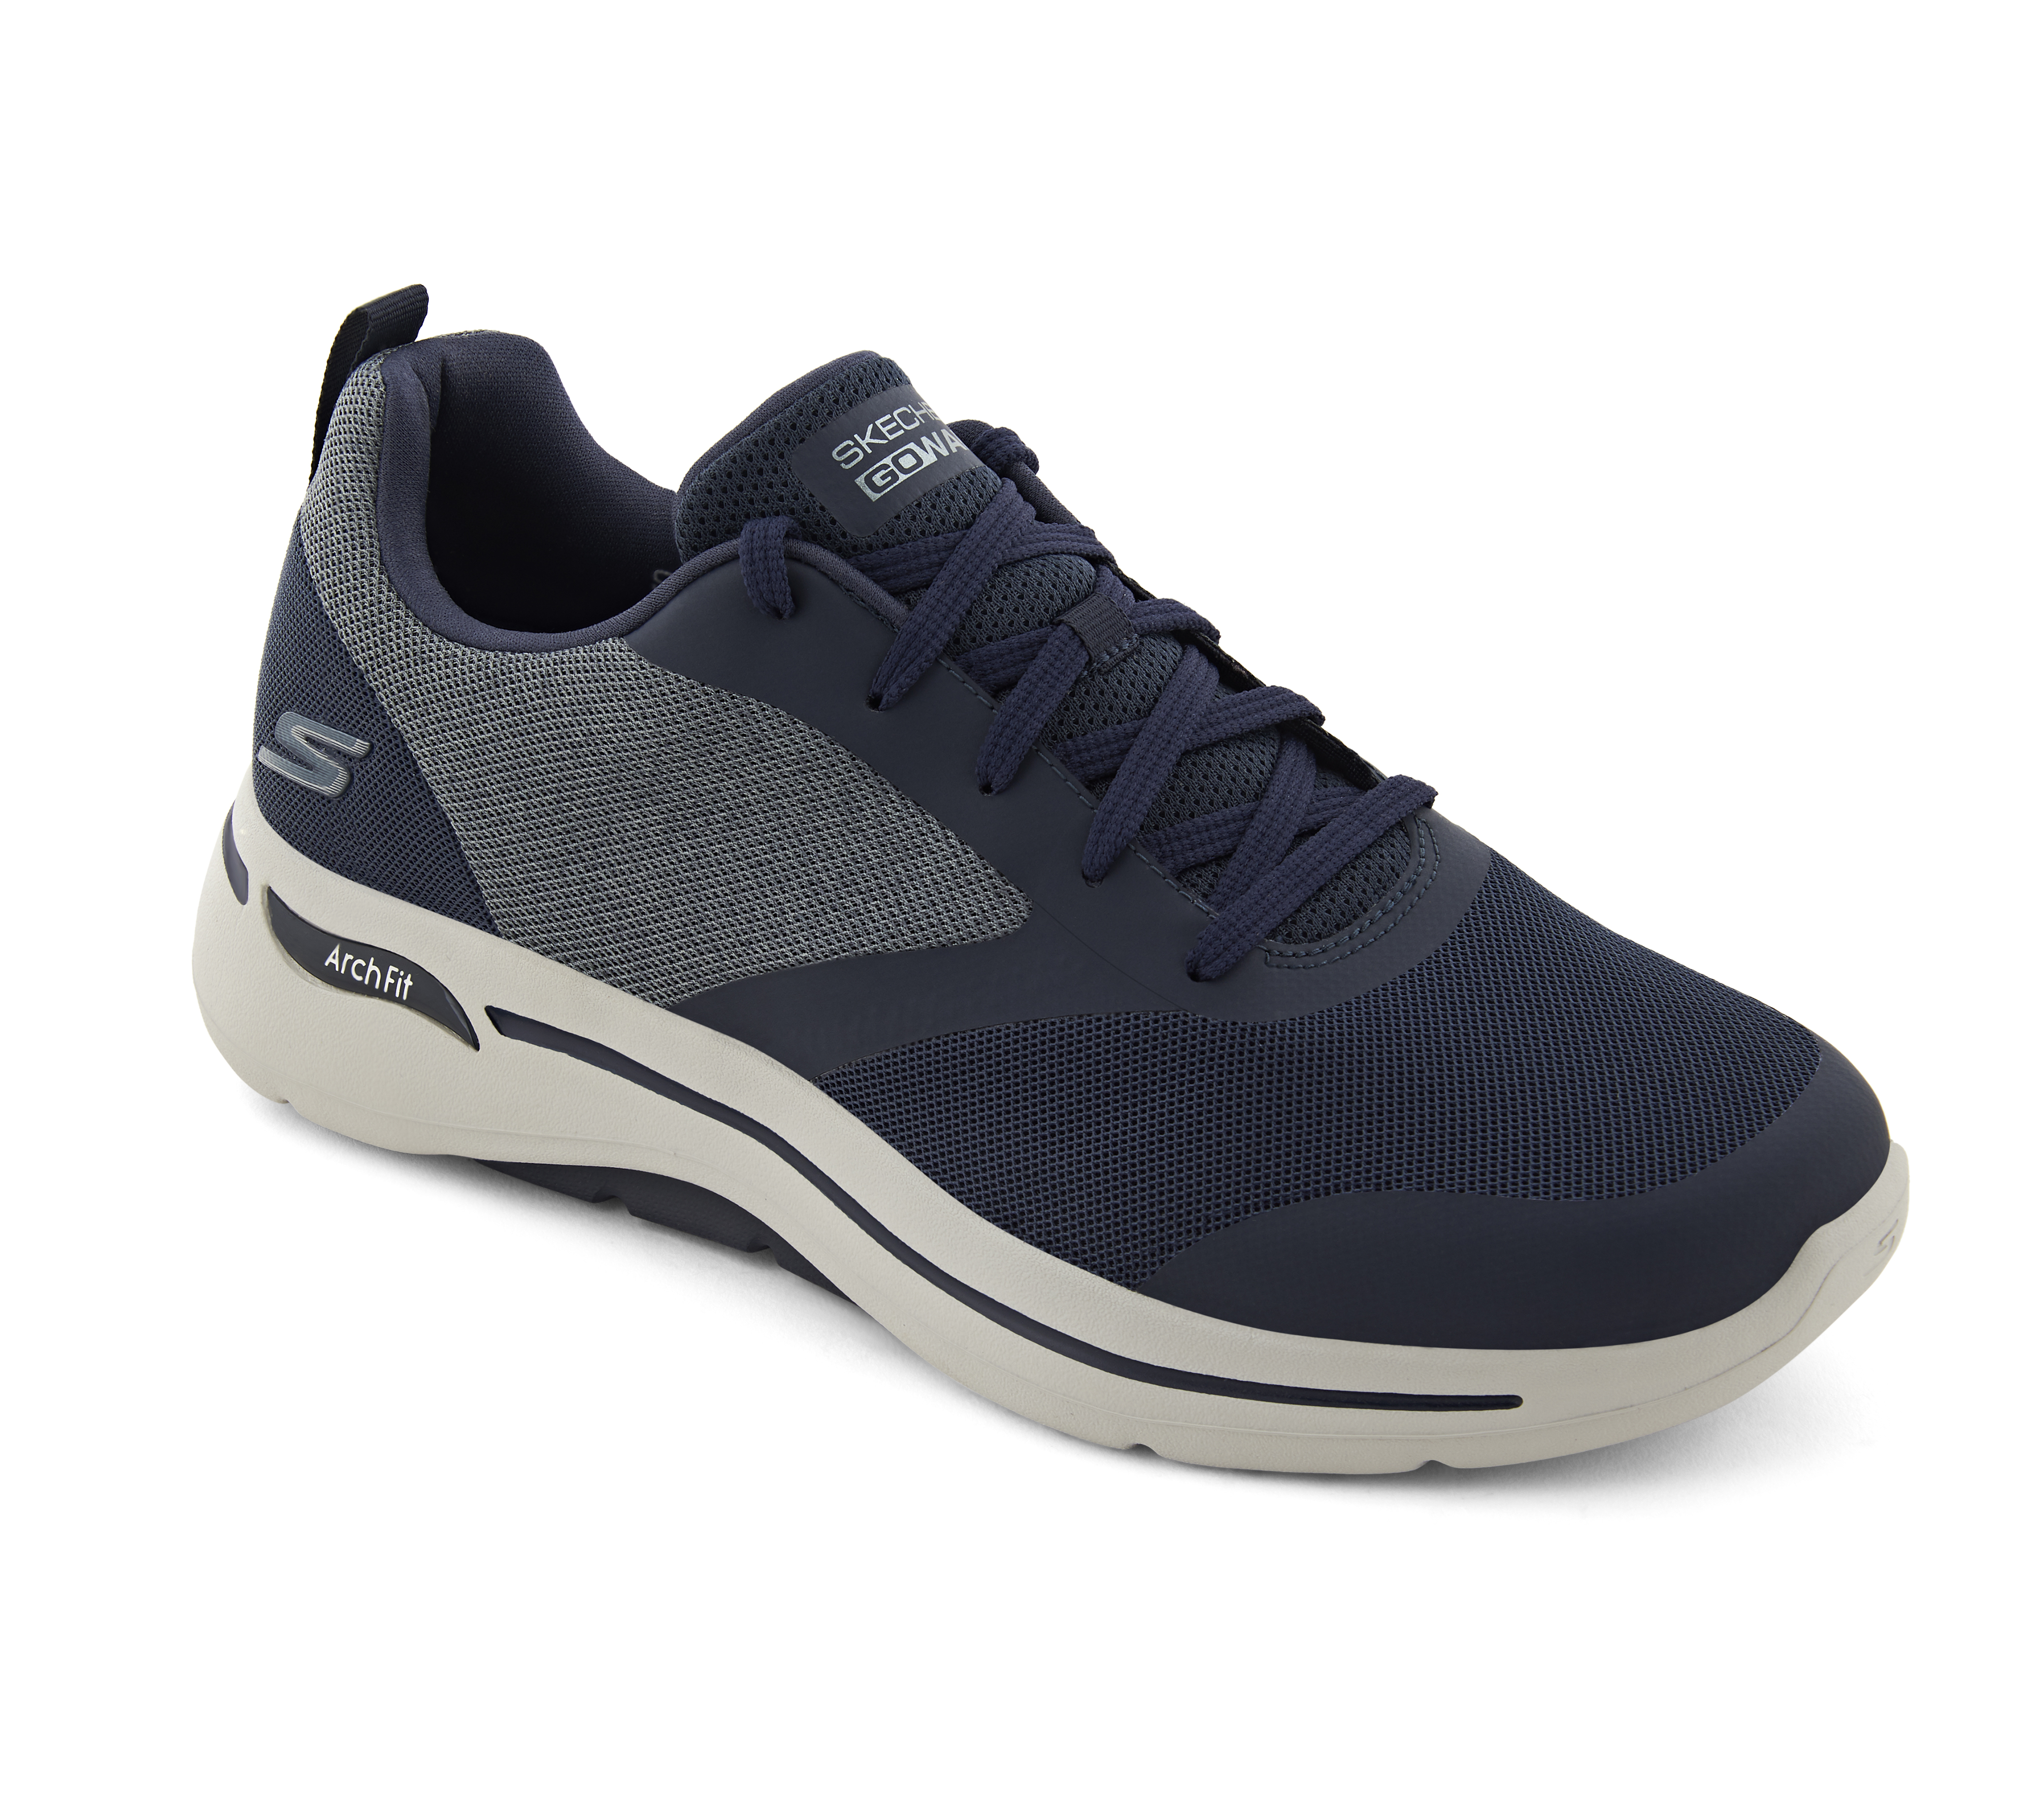 GO WALK ARCH FIT - SKY VAULT, Navy image number null